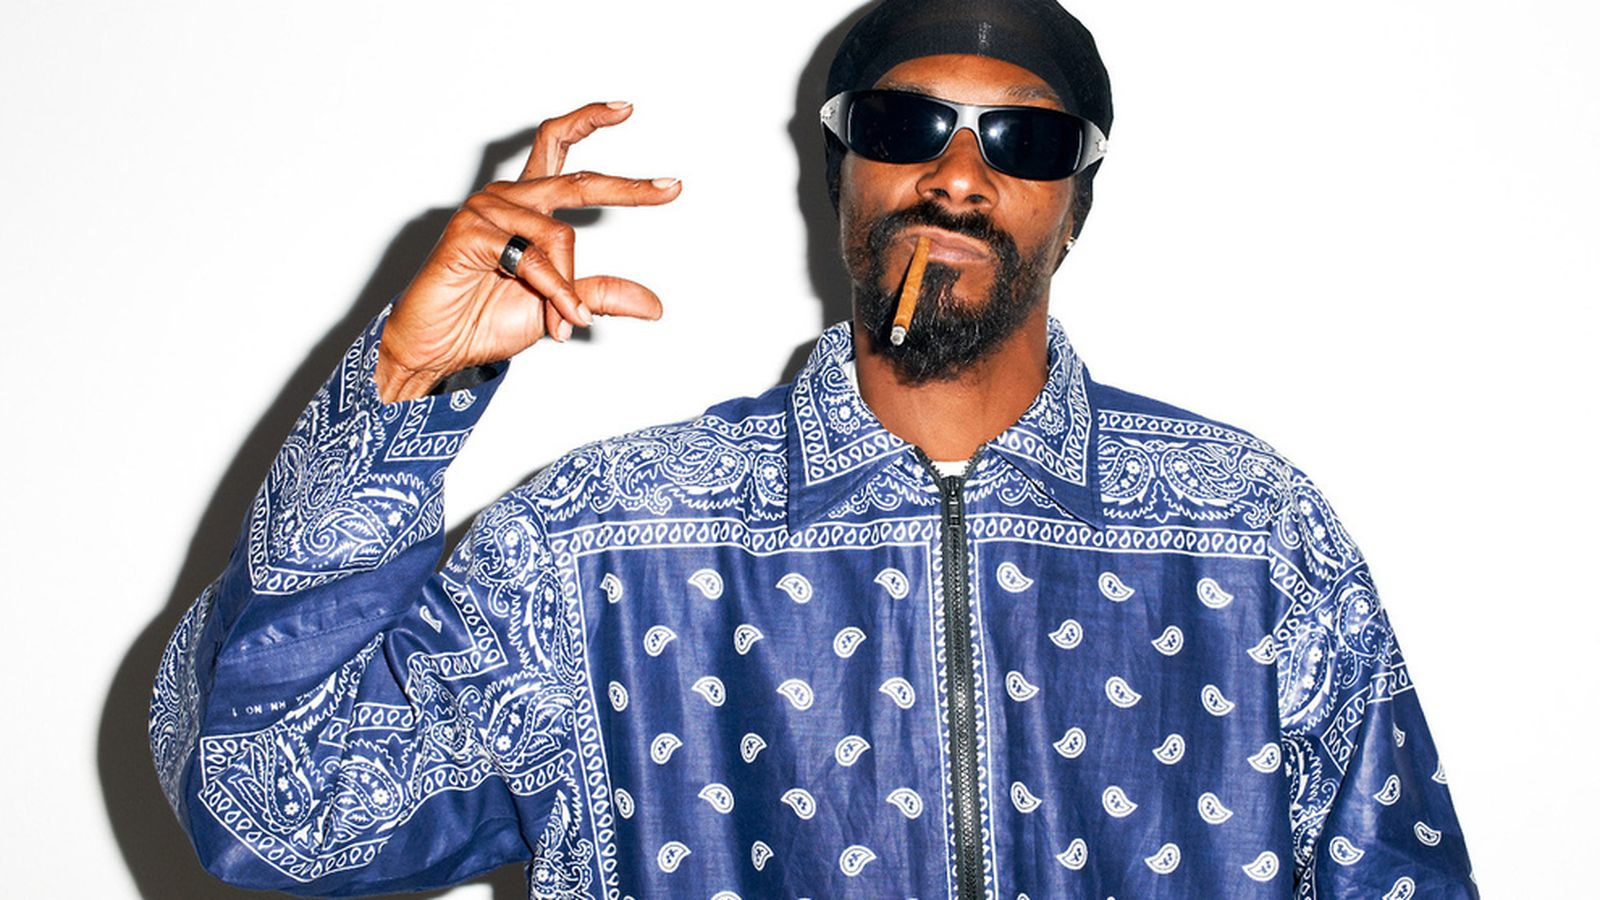 Snoop Dogg Catching Heat For Grocery Store Wine Promo During Black History Month